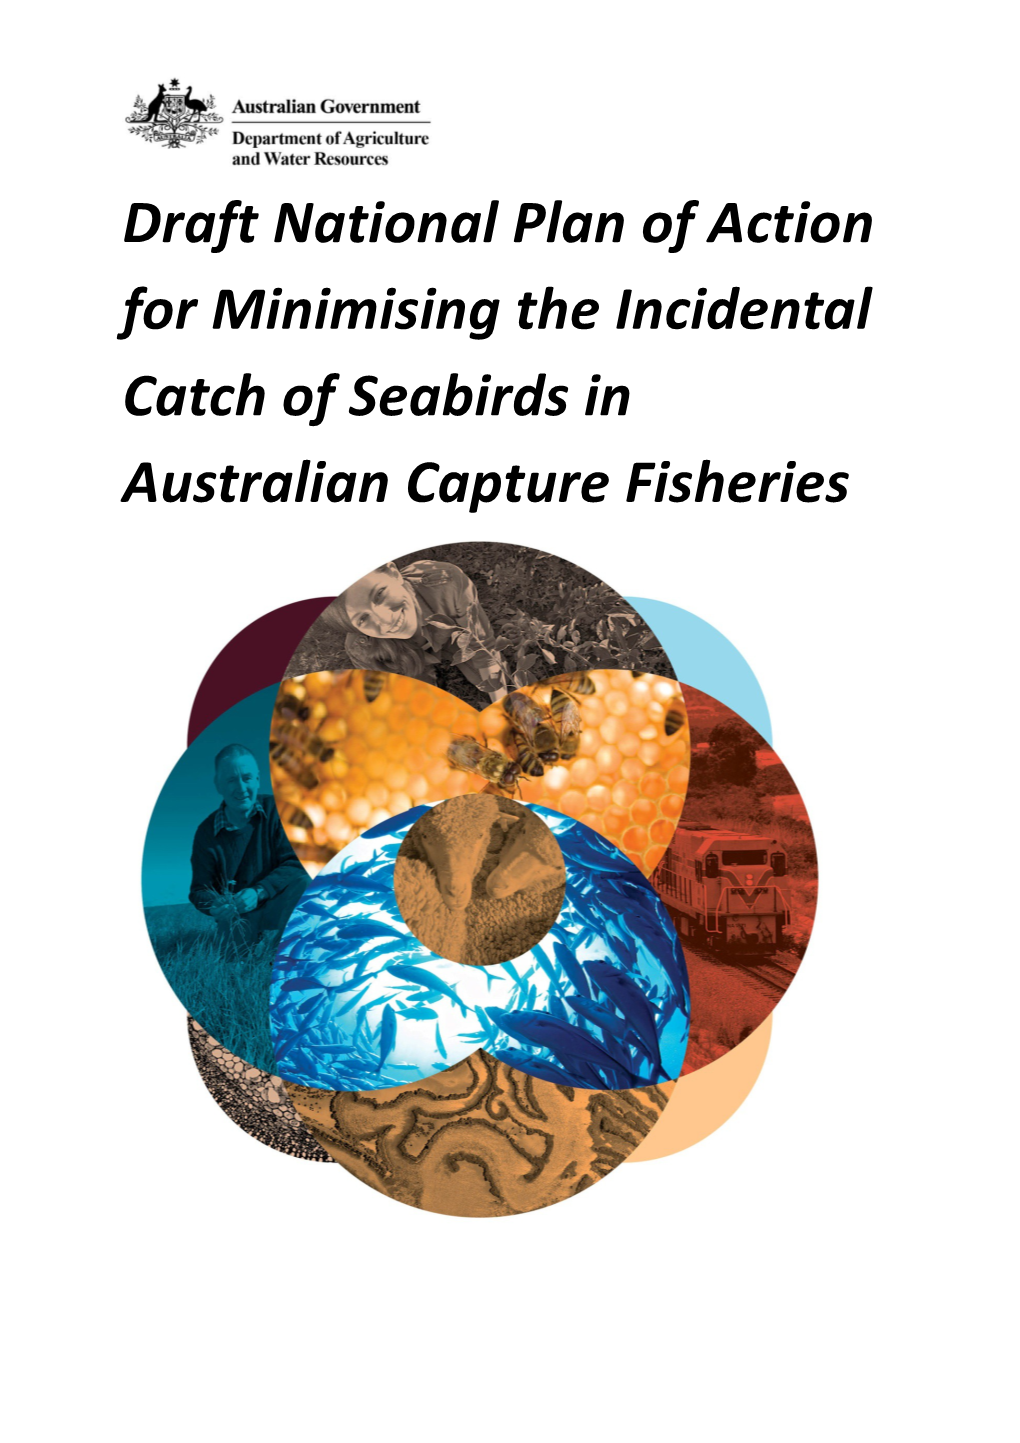 Draft National Plan of Action for Minimising the Incidental Catch of Seabirds in Australian